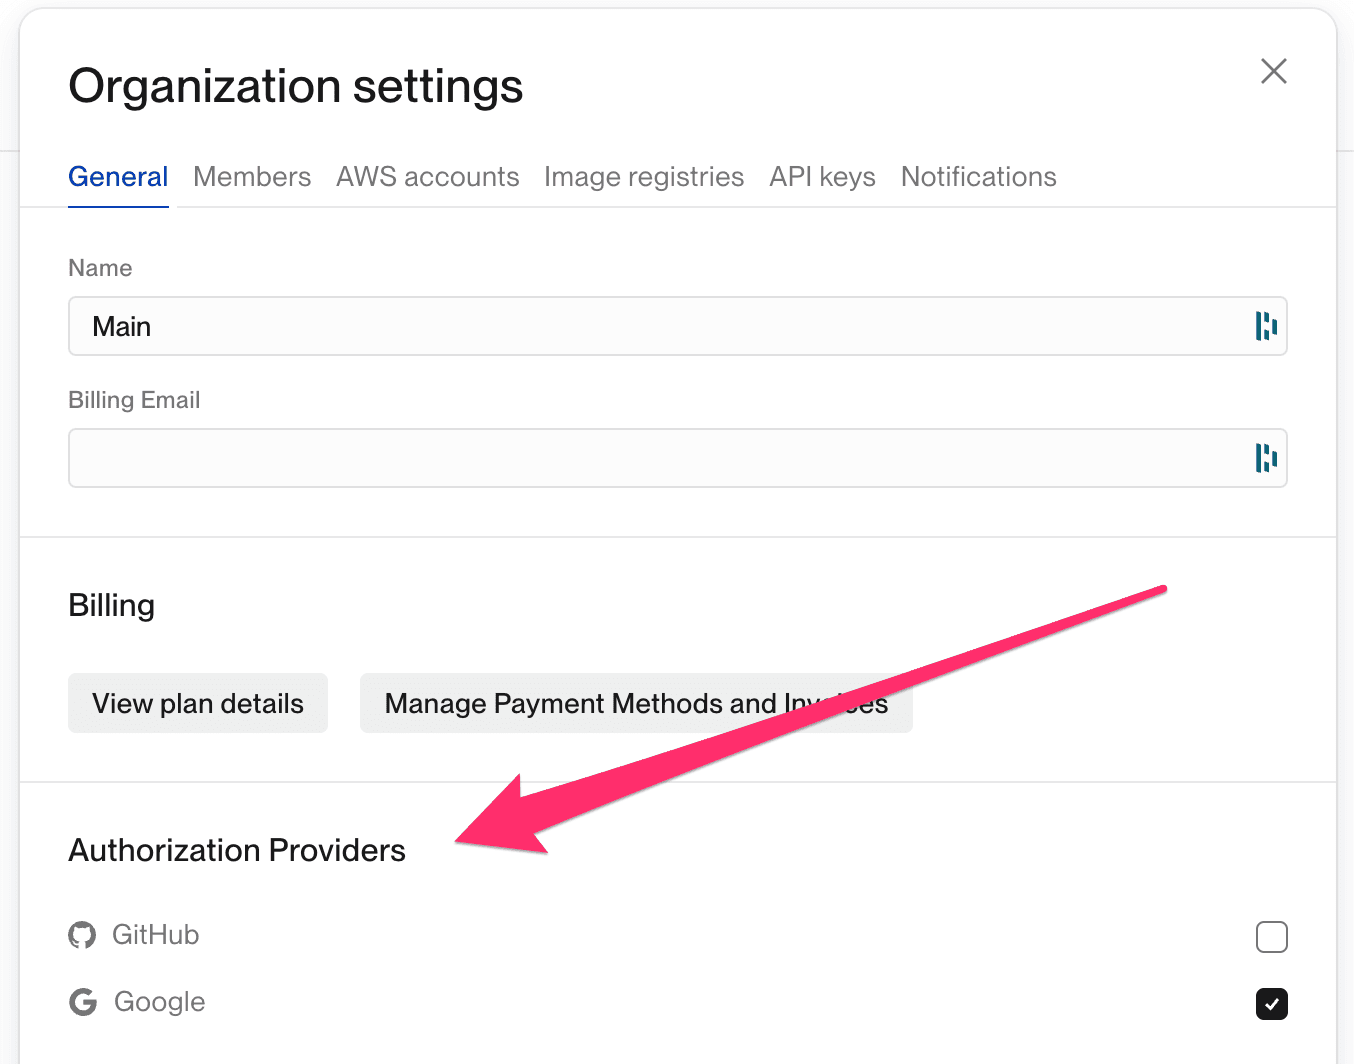 Organization settings in Flightcontrol settings page with the option to enable SSO with Google or Github